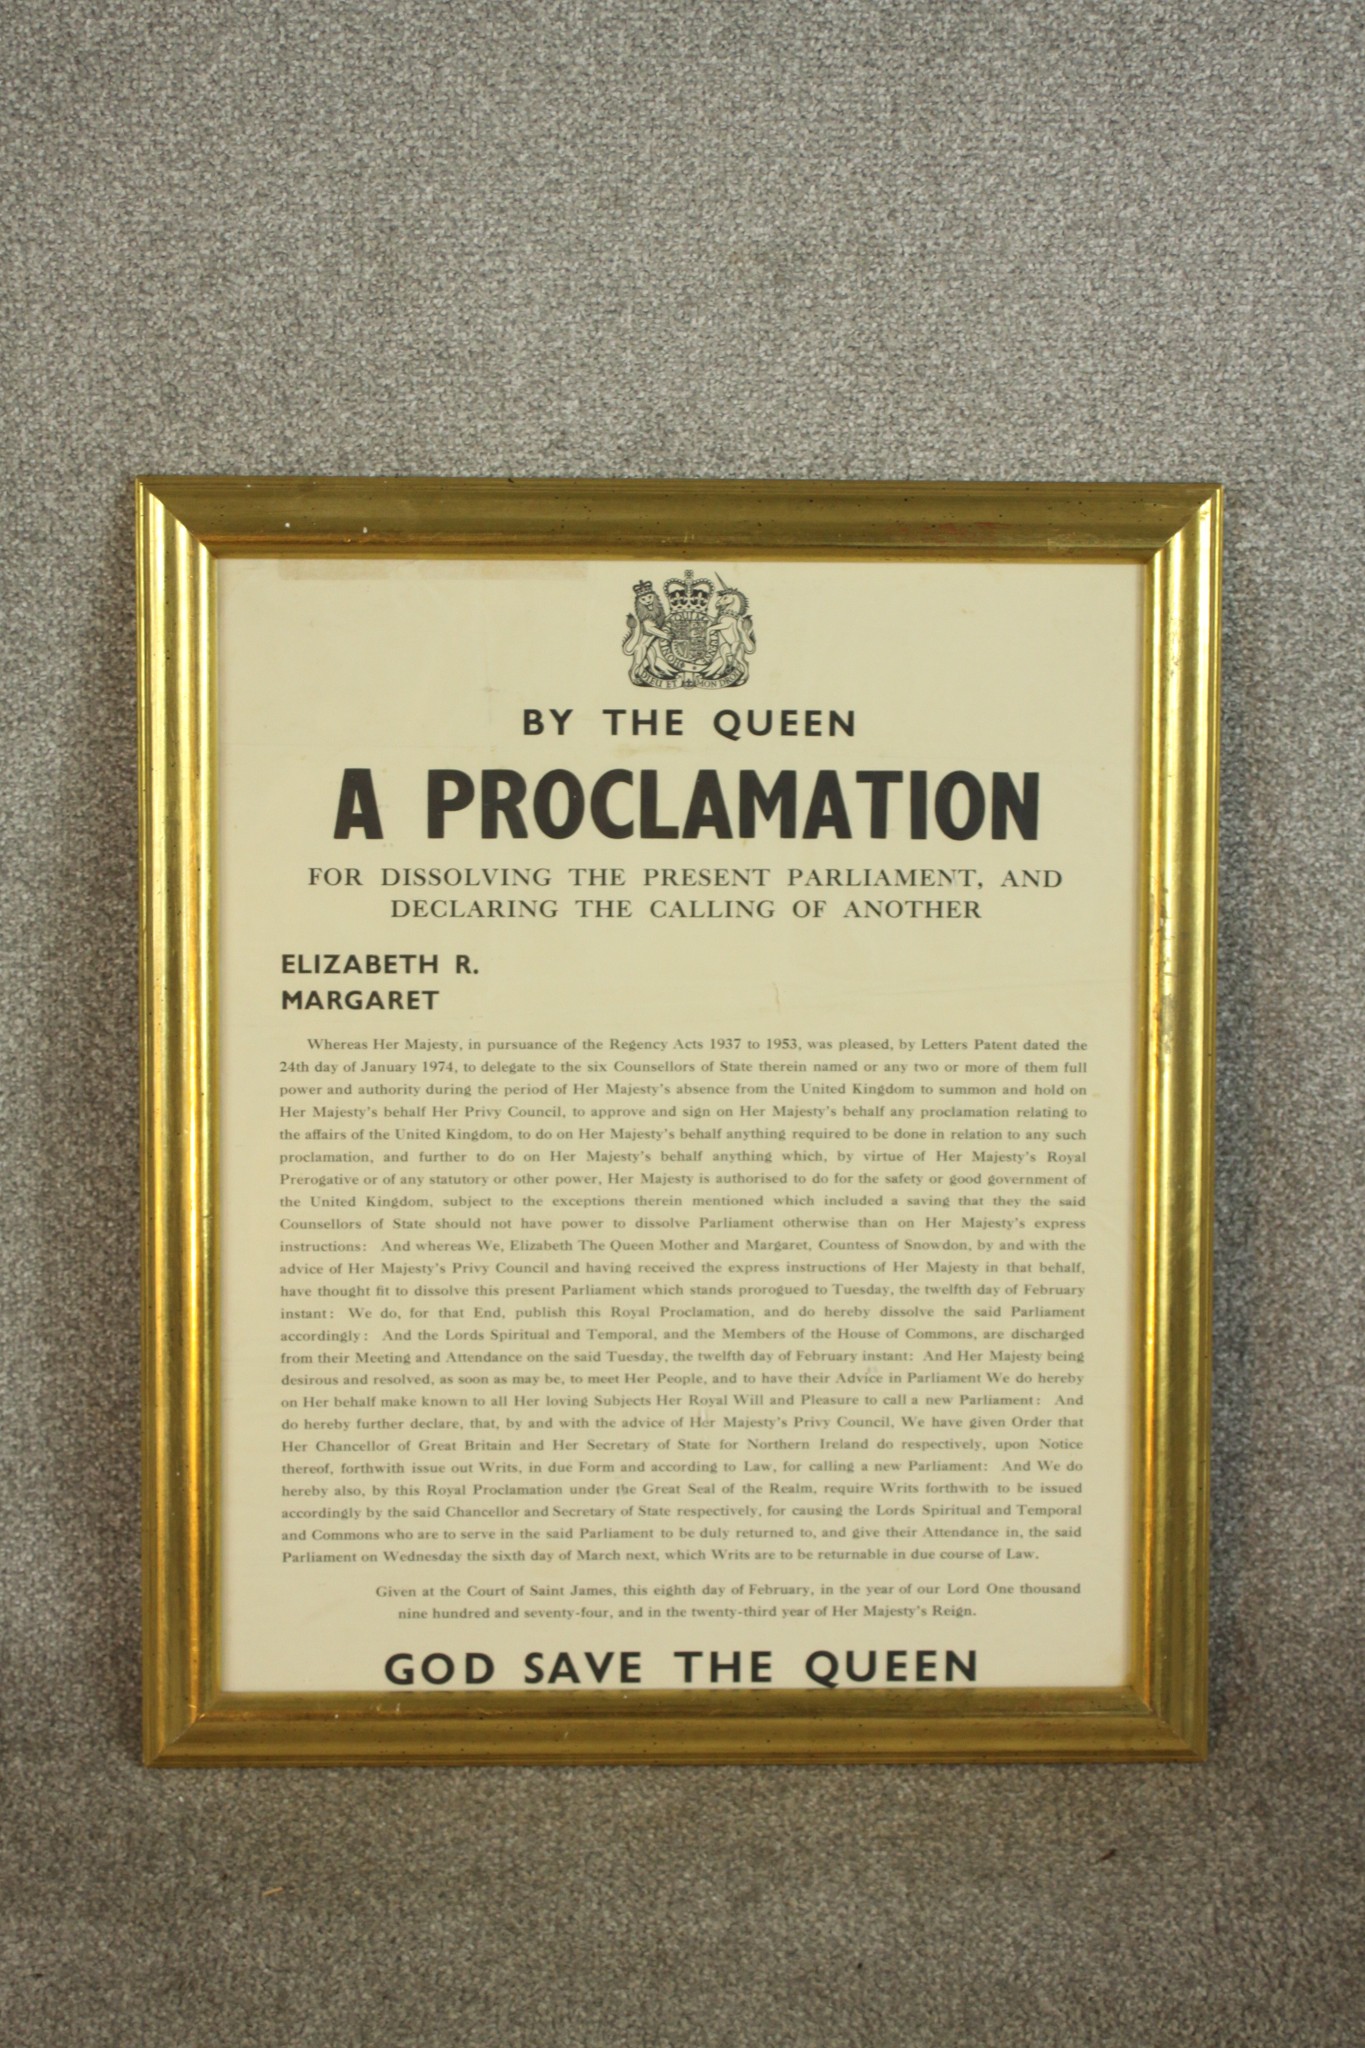 A mid 20th century framed proclamation certificate dated 8th February 1974. Dissolving one